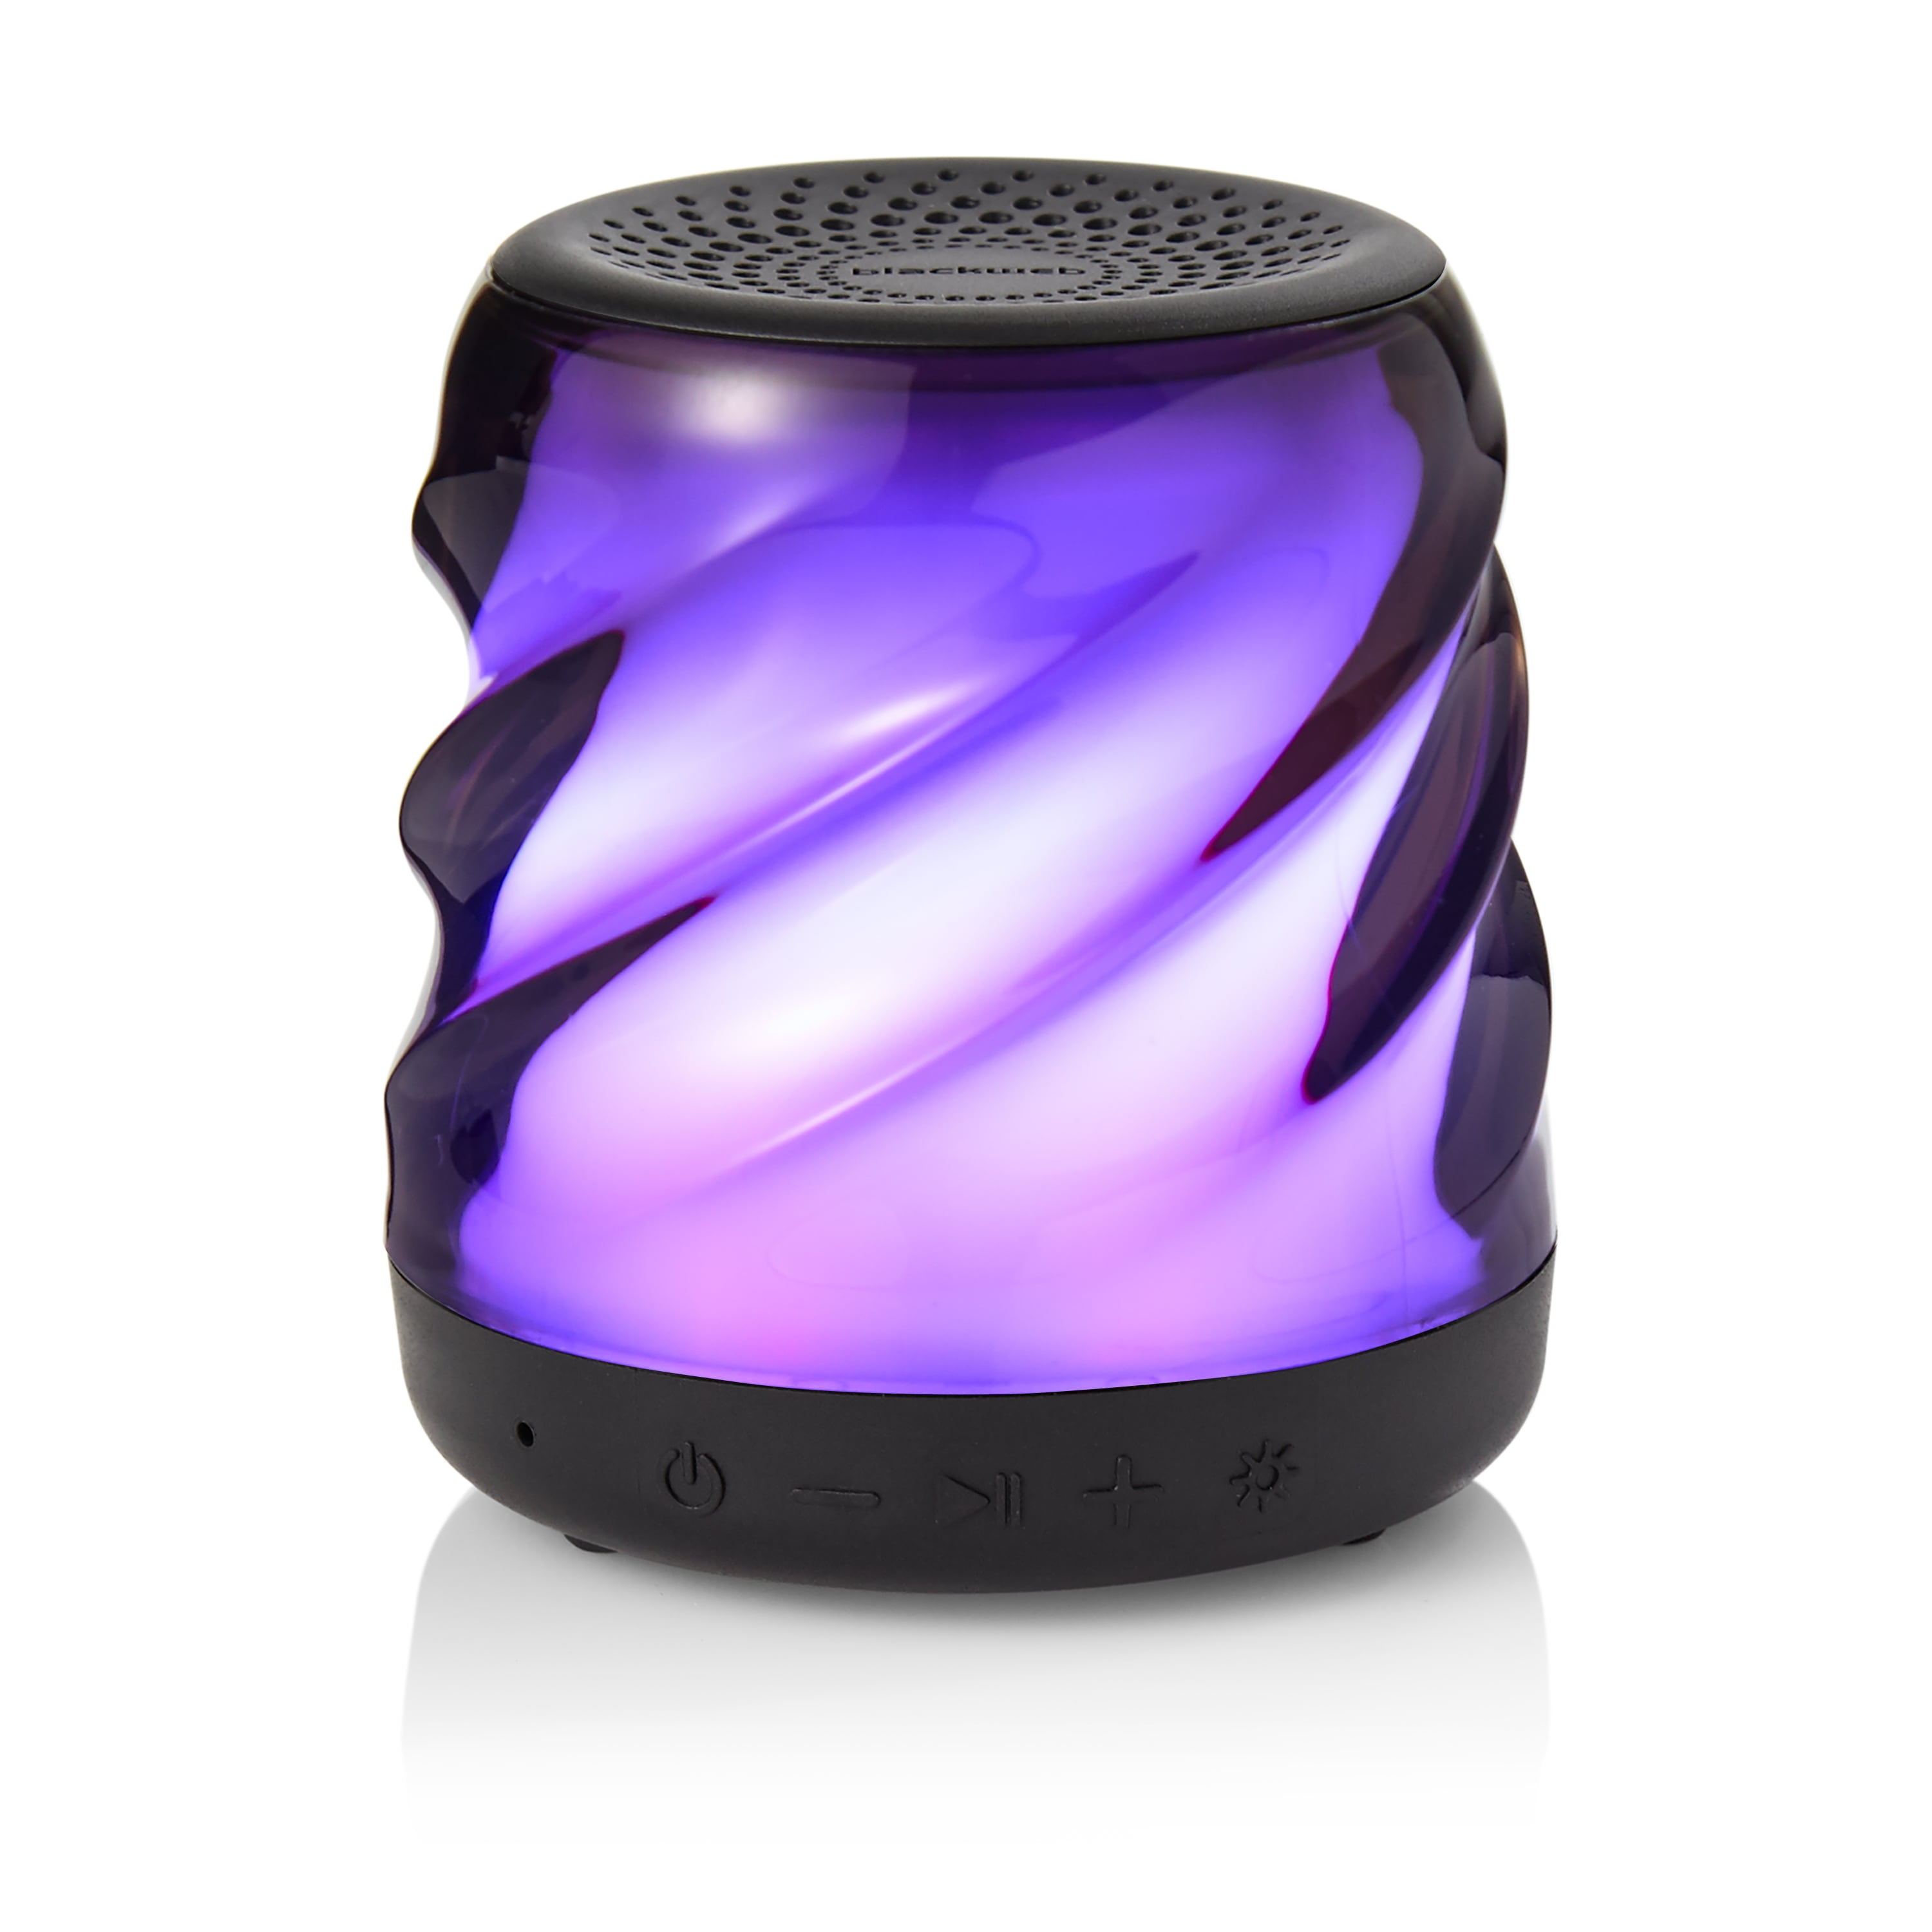 car speakers that light up to the beat